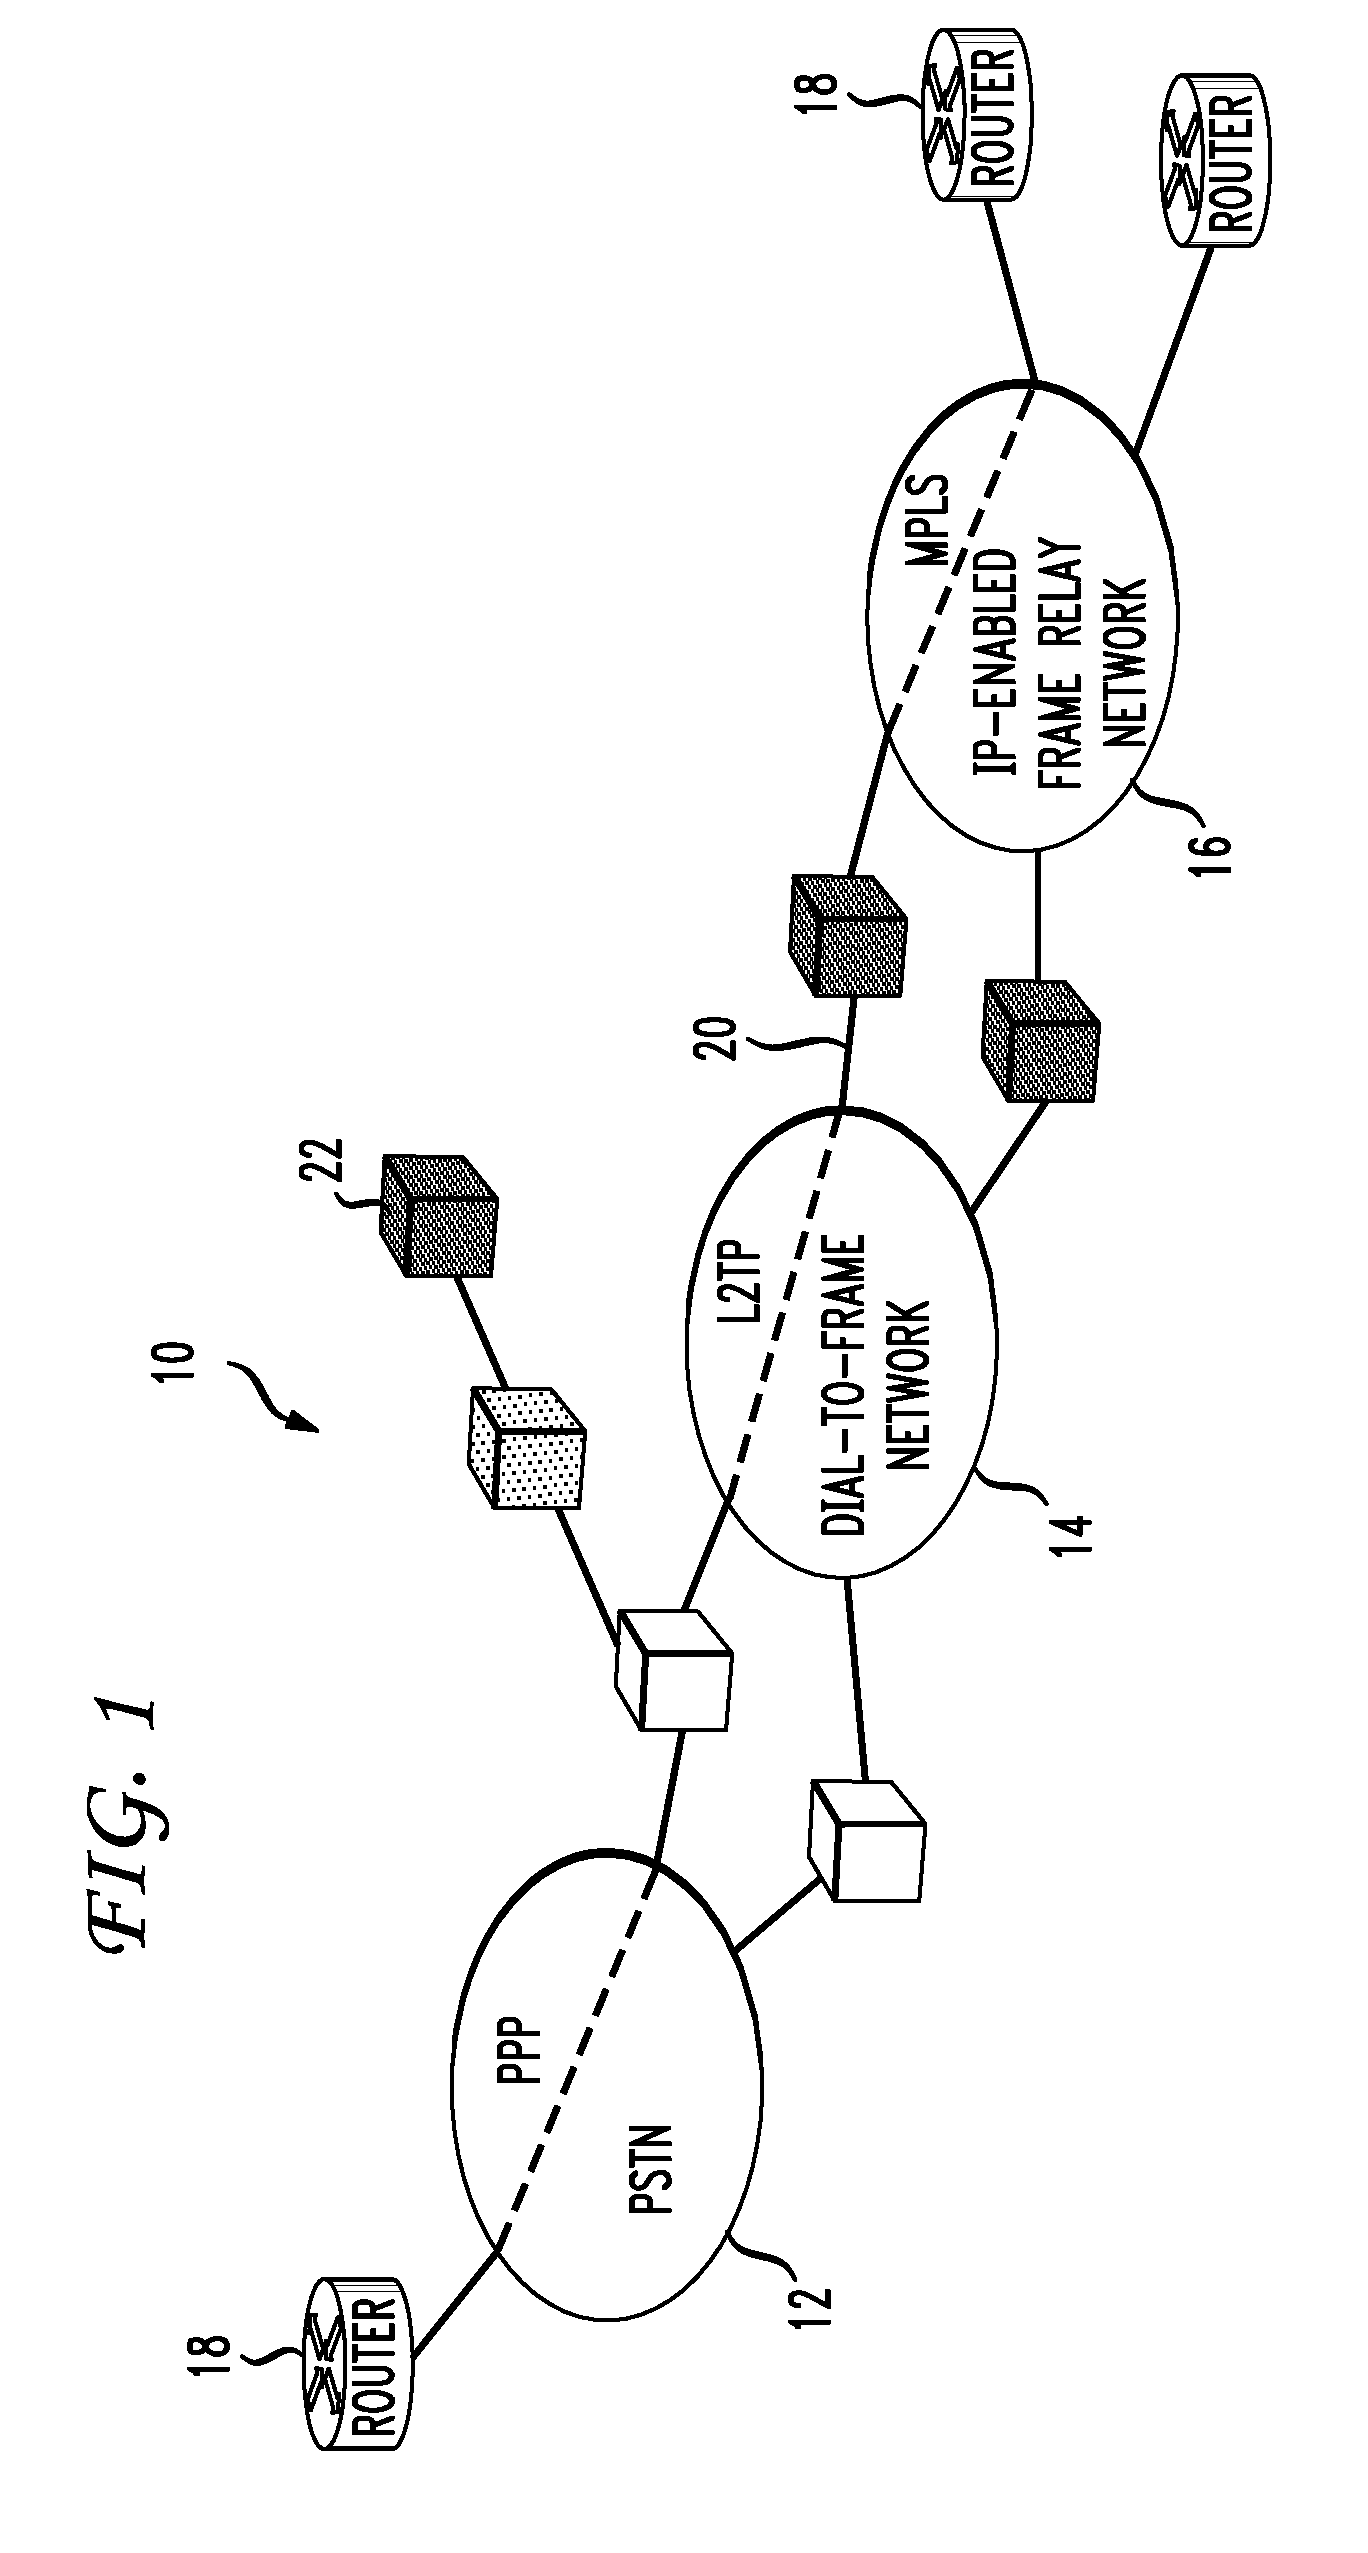 Method and system for detecting and managing a fault alarm storm